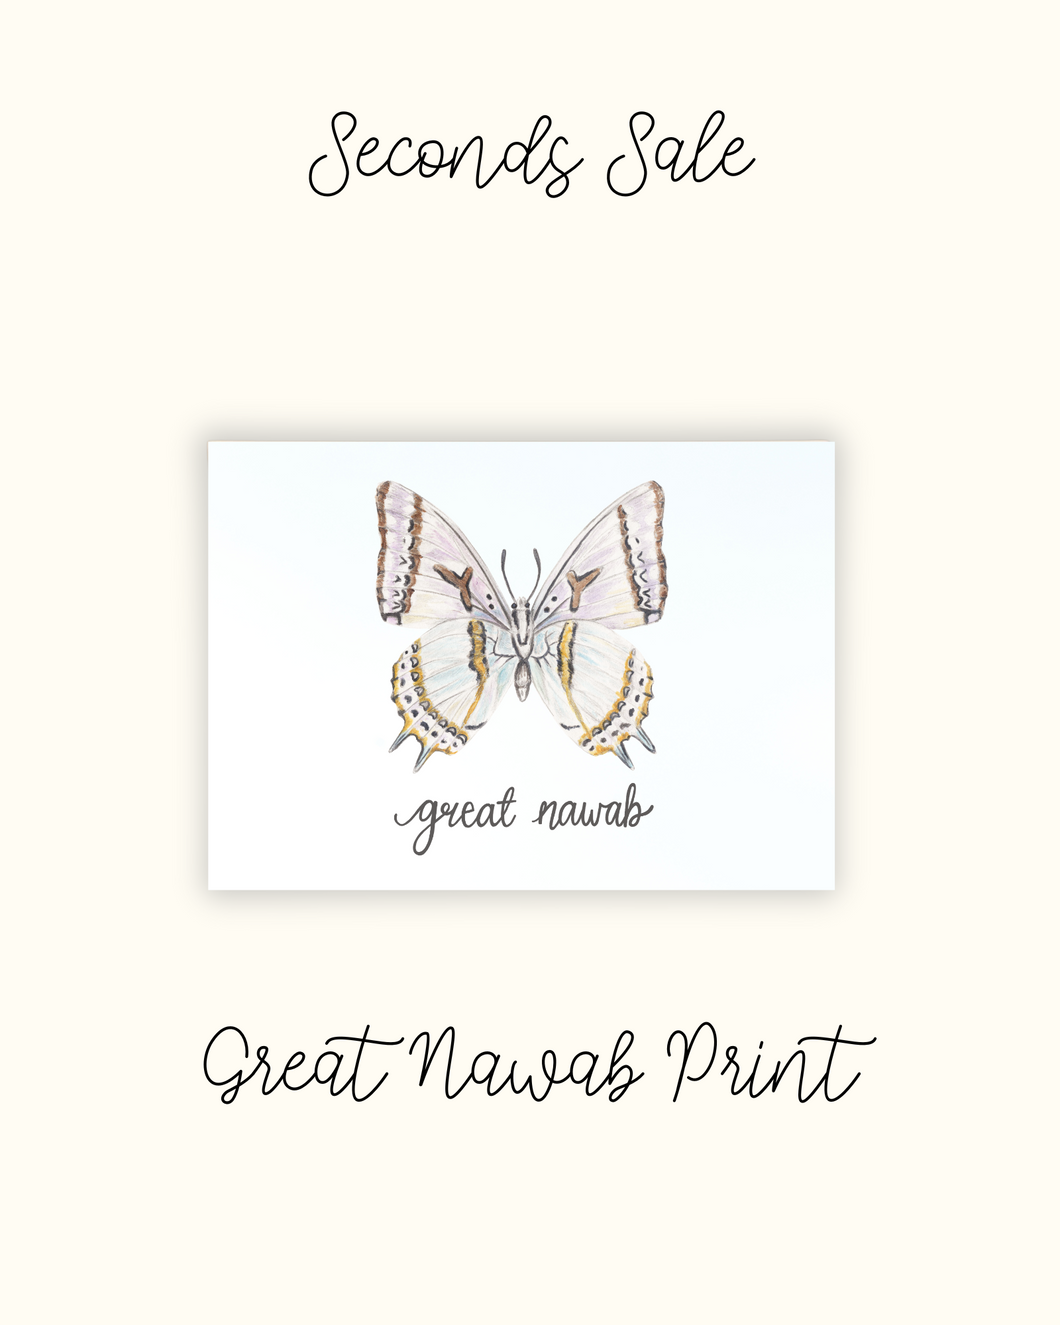 Great Nawab Butterfly Print - Seconds Sale